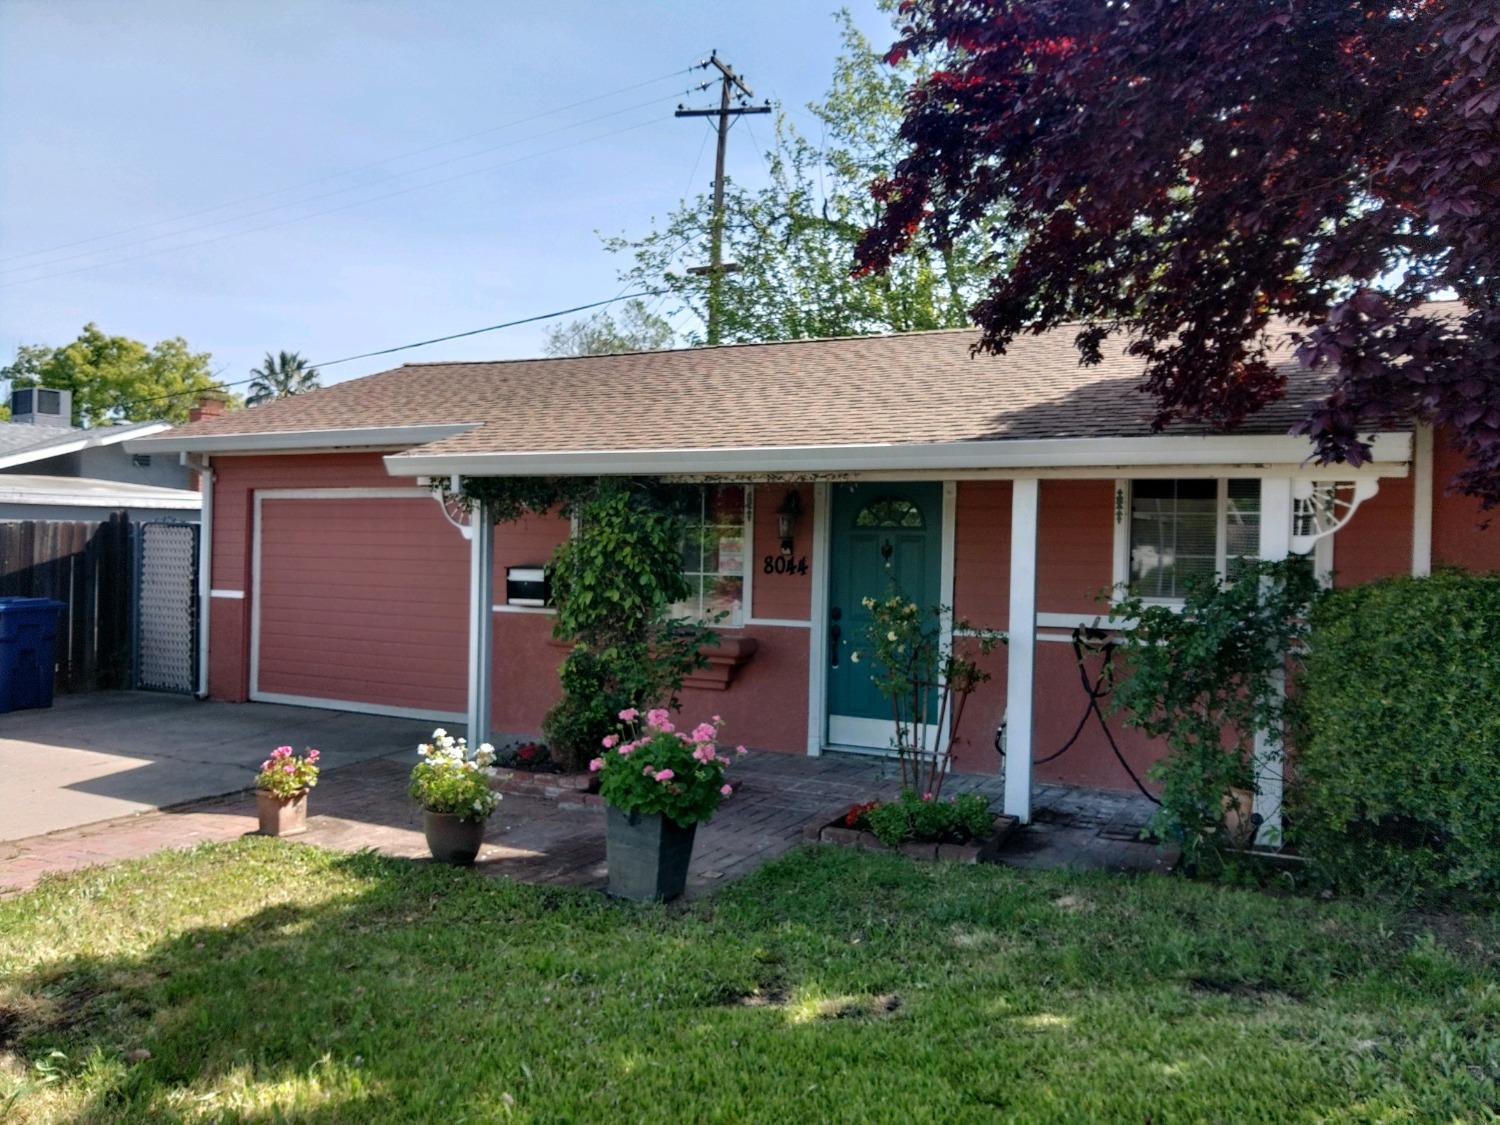 Photo of 8044 Lichen Dr in Citrus Heights, CA